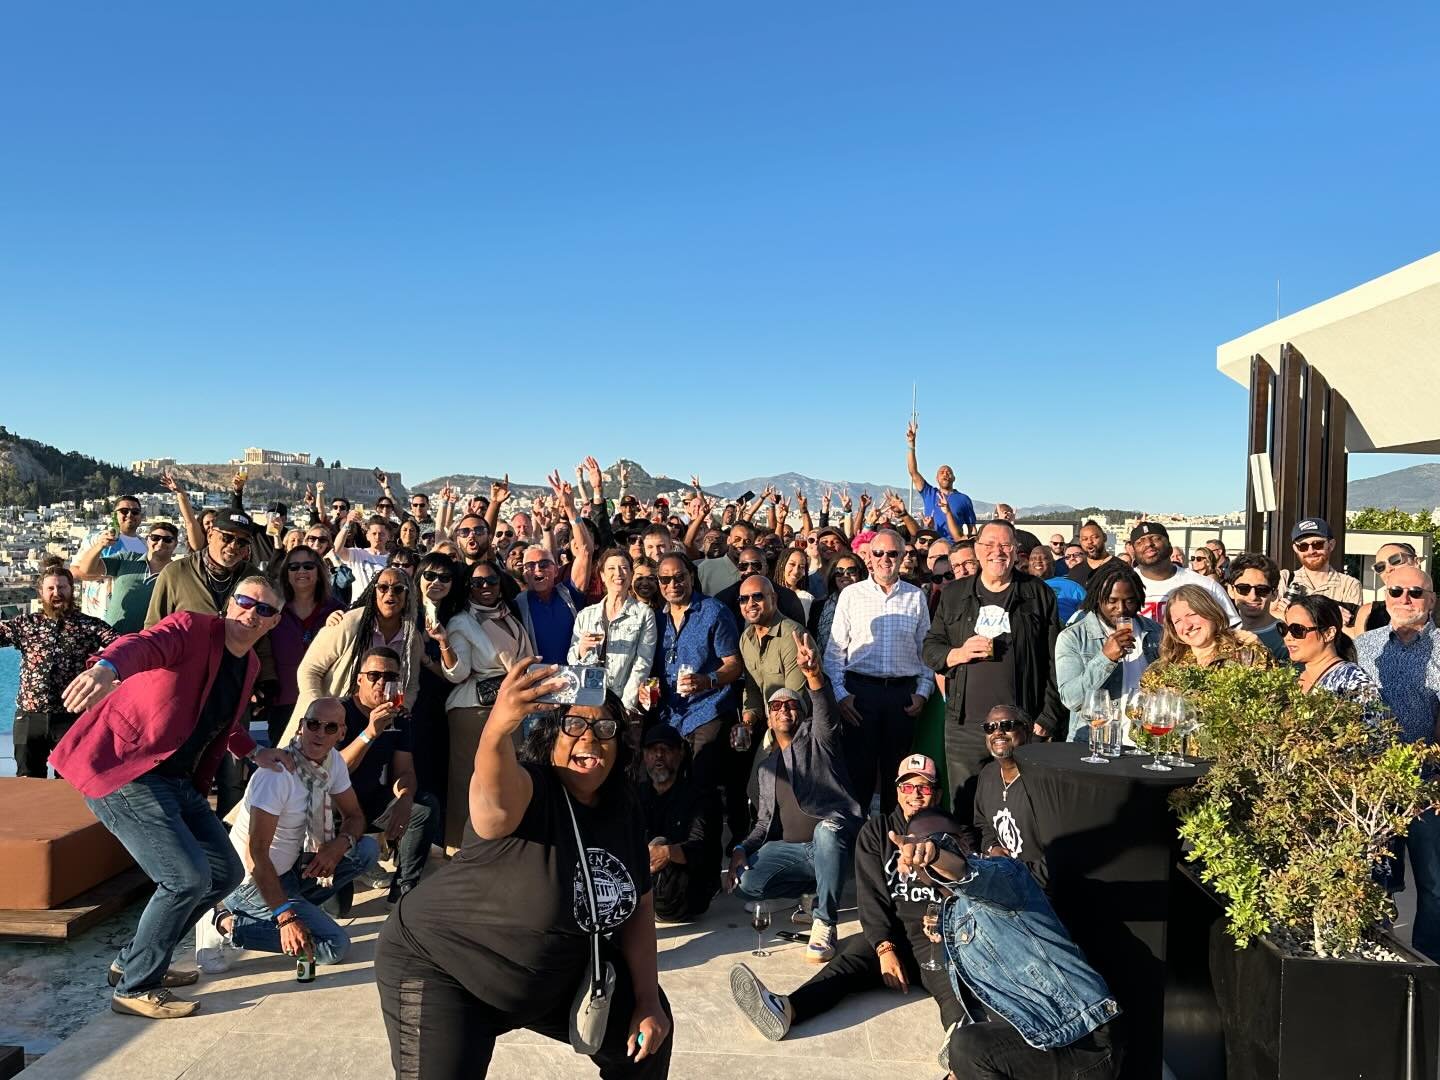 This crazy mob (aka our amazing cruise family) will be getting&rsquo; on a boat tmrw morning here in #Athens with about 2000 of our closest friends for the next chapter of &lsquo;seeing the world together through music&rsquo;&hellip;and we all can&rs